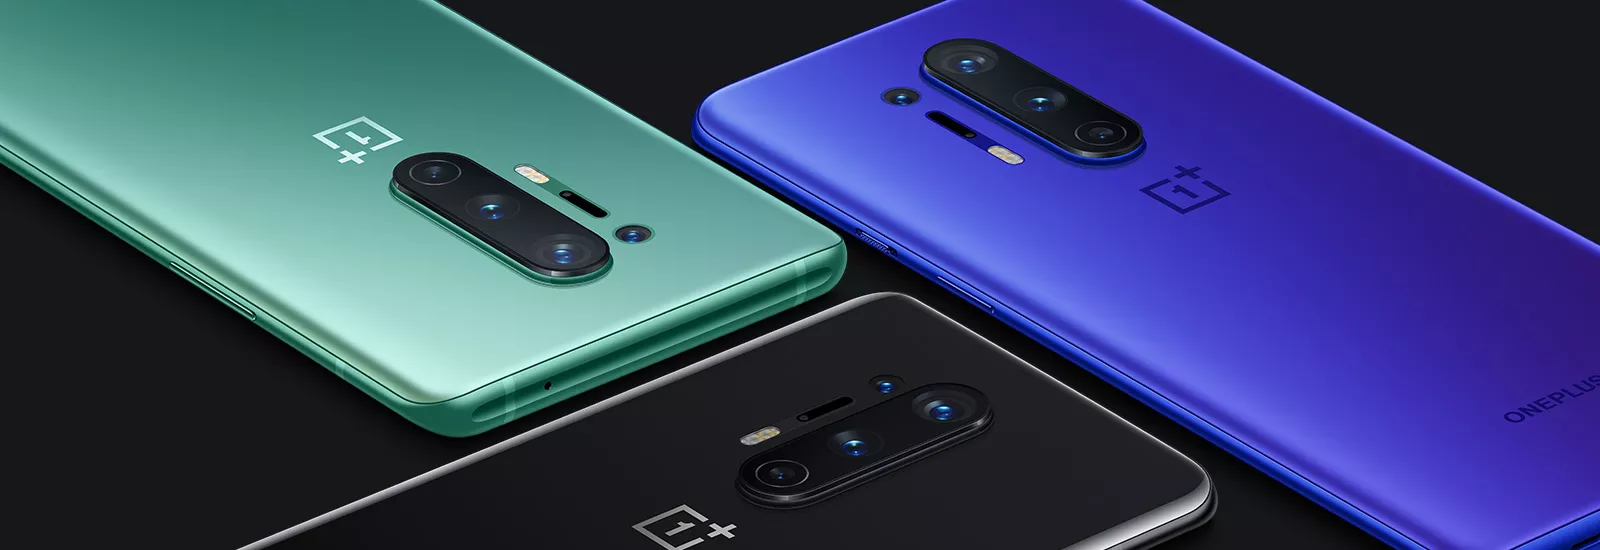 OnePlus OxygenOS 10.5.10 OTA update released for OnePlus 8 Pro mobile phones, with awesome feautres like HEVC recording, Fortnite maker in Game Space and many System Optimisations.